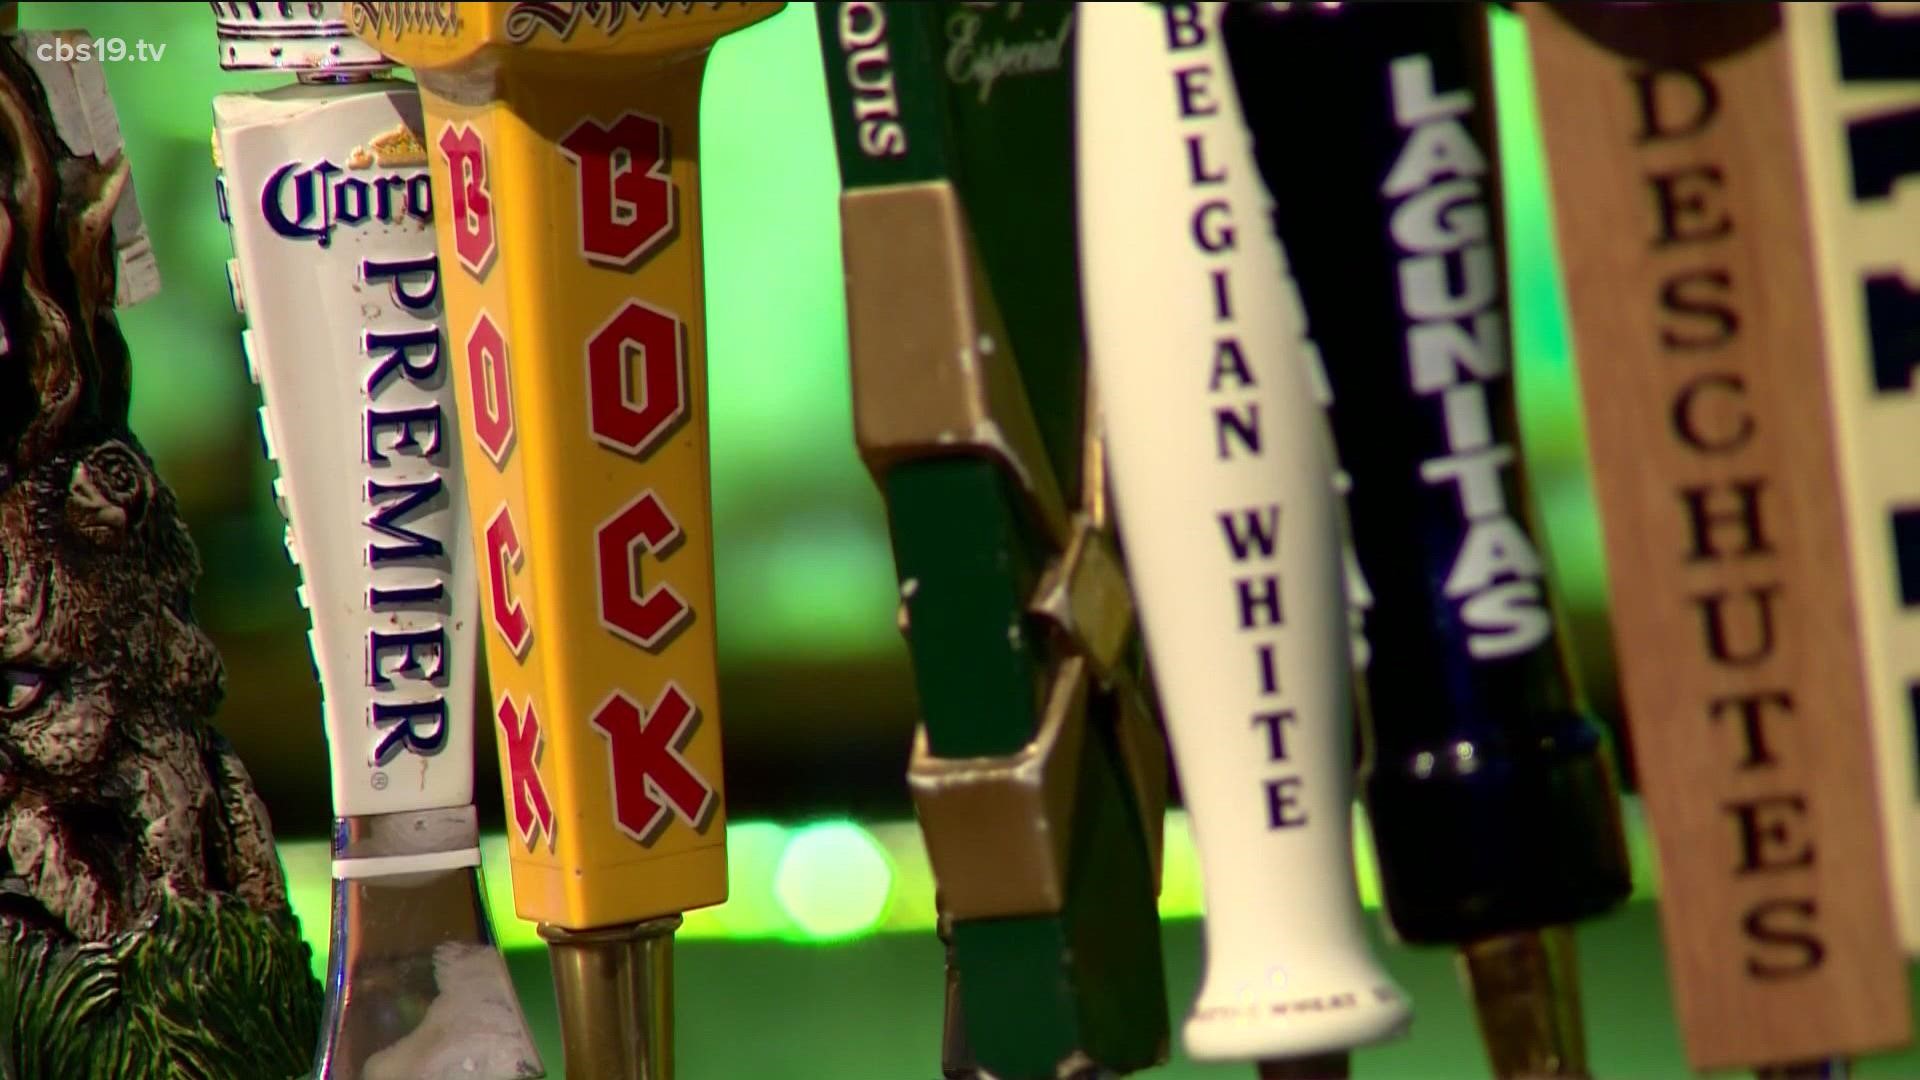 Bars will be enforcing safety measures to ensure no one gets over-intoxicated